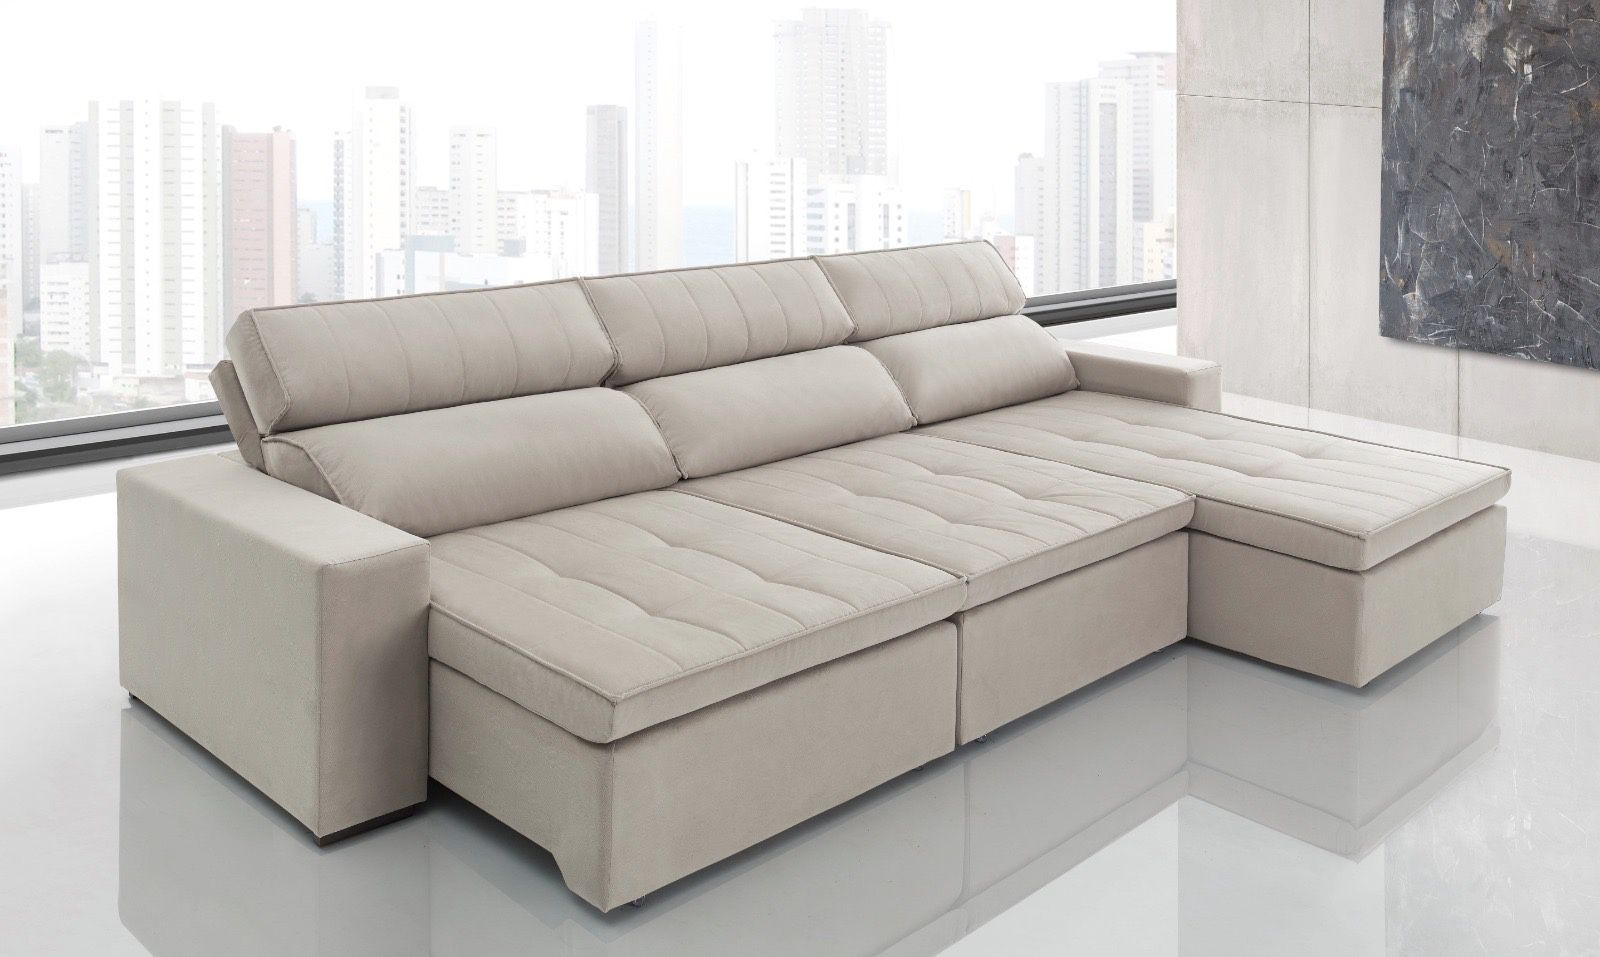 BRAND NEW // Tokyo Fabric Retractable and Reclining Sofa